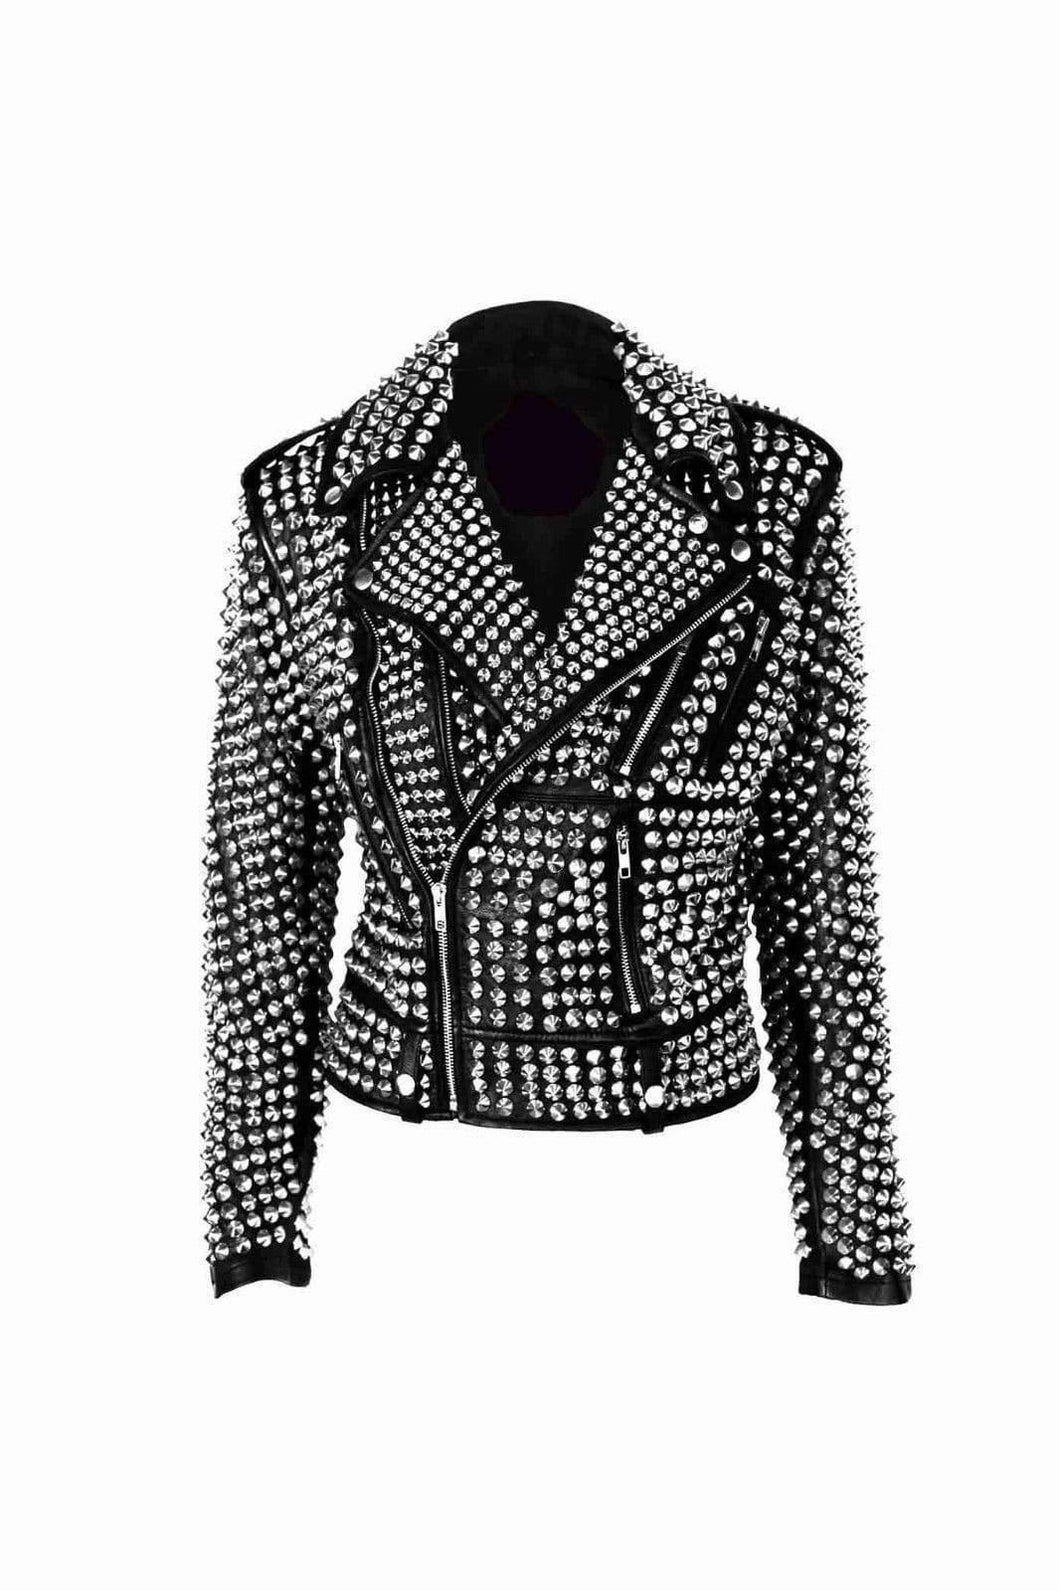 A.L.C Woman Full Silver Studded Punk Cowhide Leather Jacket - Shearling leather